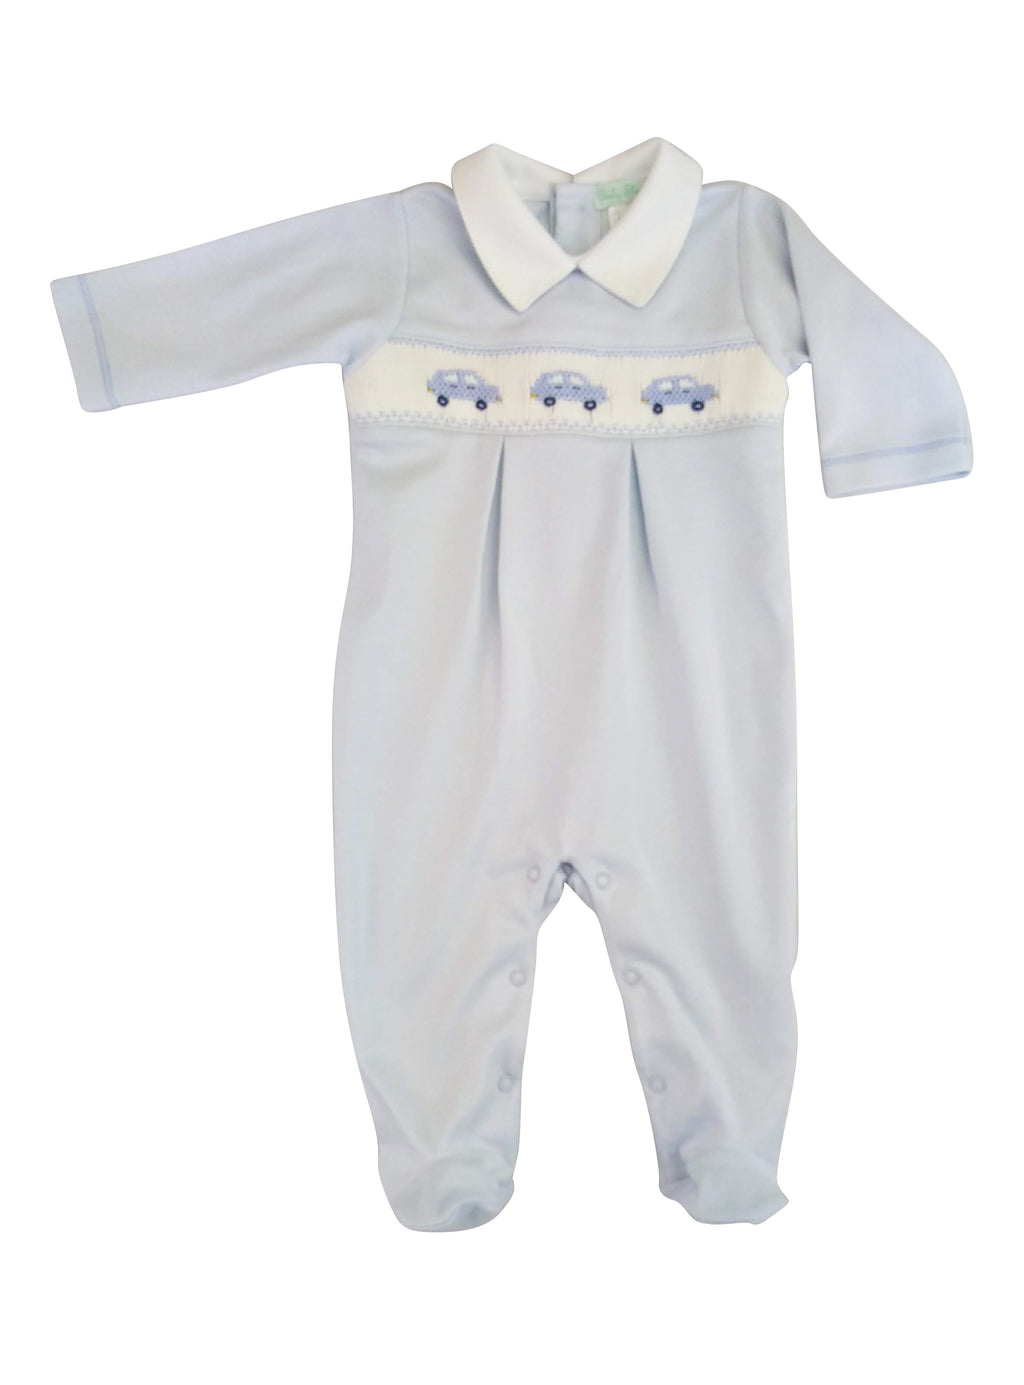 Baby Boy's Smocked Blue Cars Footie - Little Threads Inc. Children's Clothing